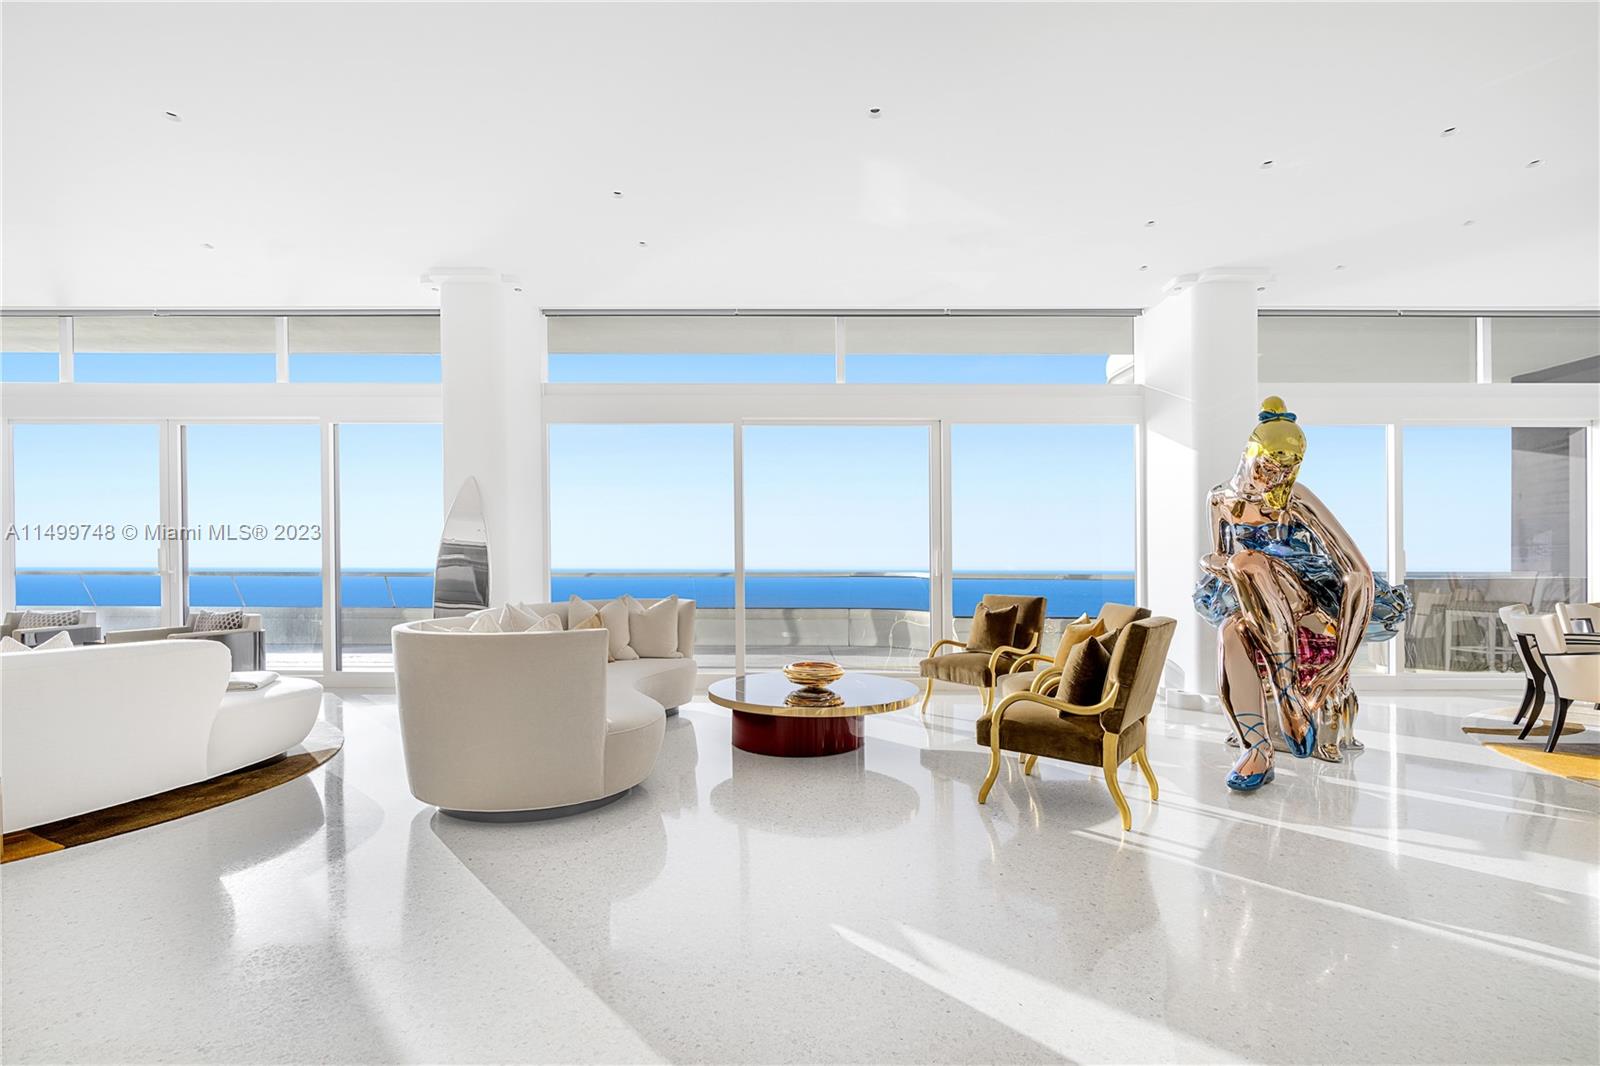 Soar above Miami Beach in this art deco masterpiece by Wetzels Brown Partners, atop Foster + Partners&#039; Faena House. Step into your 6,400 SF kingdom, immersed in curated masterpieces &amp; panoramic 270° views of the city &amp; ocean. 6 beds/6.5 baths, Nanz ebony handles &amp; Italian Terrazzo floors, this is luxury living redefined. Host a dinner party or gather by the custom Metrica bookcase w/ LED accents overlooking the Atlantic Ocean. Culinary dreams ascend in the Molteni kitchen. Oceanfront primary suite is a sanctuary of ebony furnishings &amp; tranquil serenity. Every detail bespoke—textured, hand-painted walls in bedrooms whisper opulence. Dornbracht &amp; Duravit fixtures exude quality. Live smarter w/ Crestron Home Automation. More than a penthouse it&#039;s a statement. Own a piece of Miami Beach&#039;s sky.